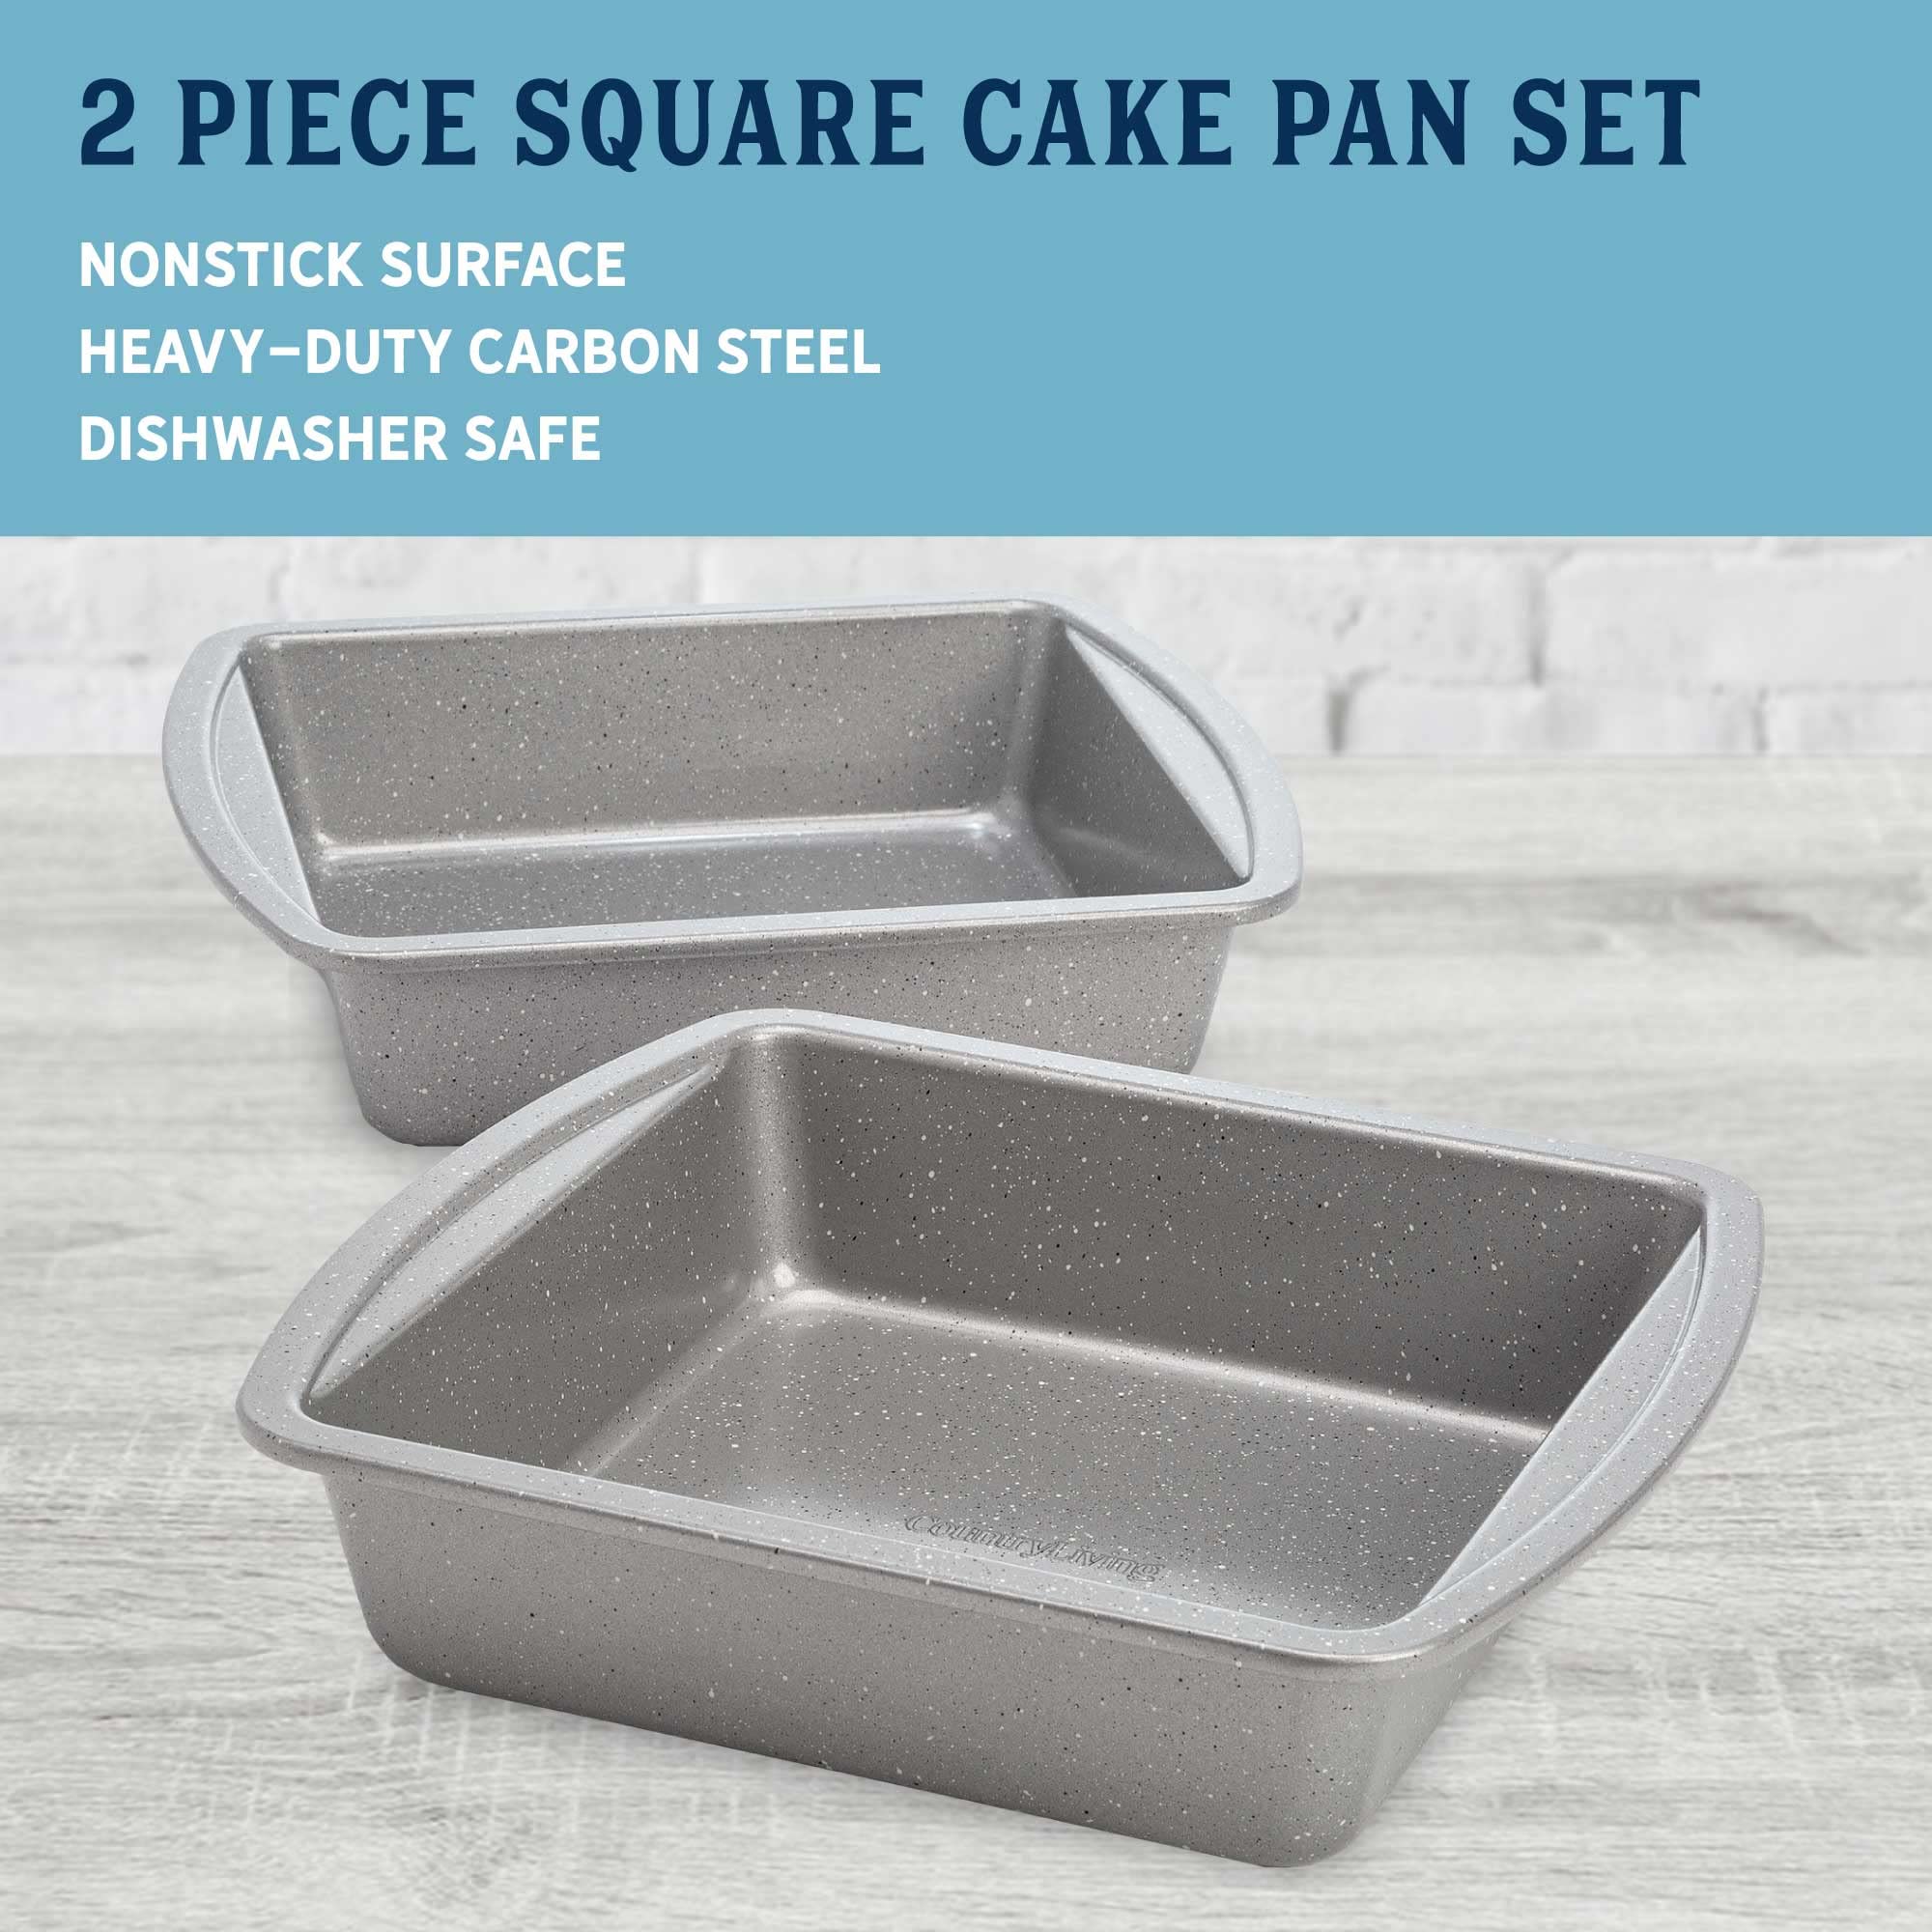 Country Living Nonstick Round Cake Pan, Heavy Duty Carbon Steel with Quick Release Coating, Made without PFOA, Dishwasher Safe, 2-Pack Bakeware Set, 9-Inch, Gray Speckle